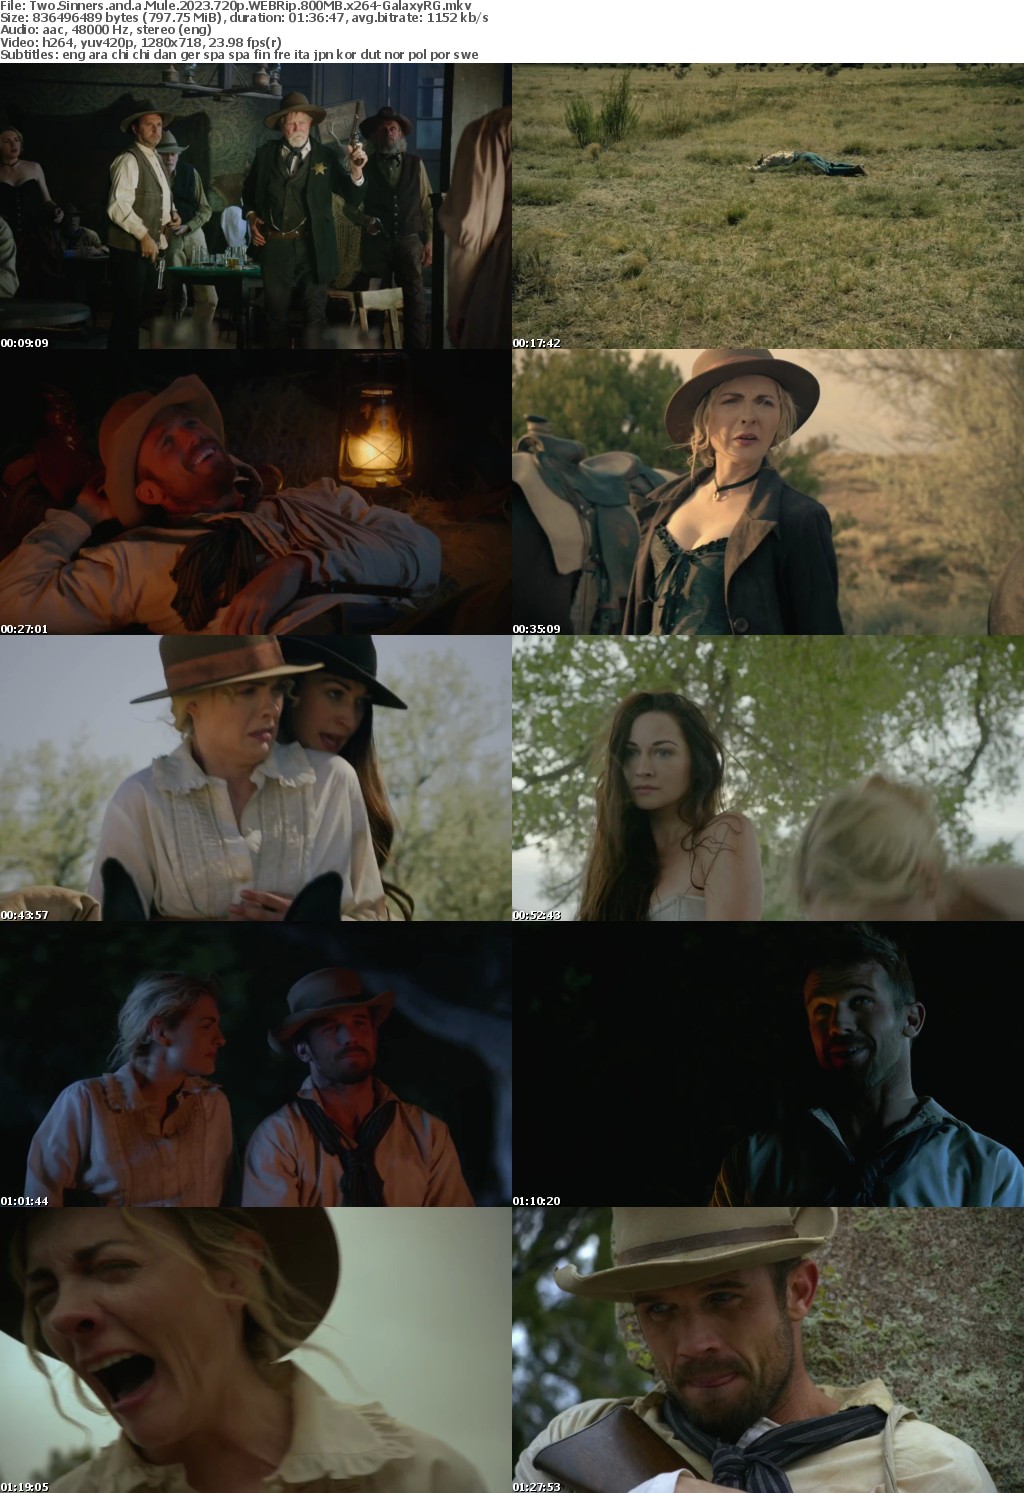 Two Sinners and a Mule 2023 720p WEBRip 800MB x264-GalaxyRG